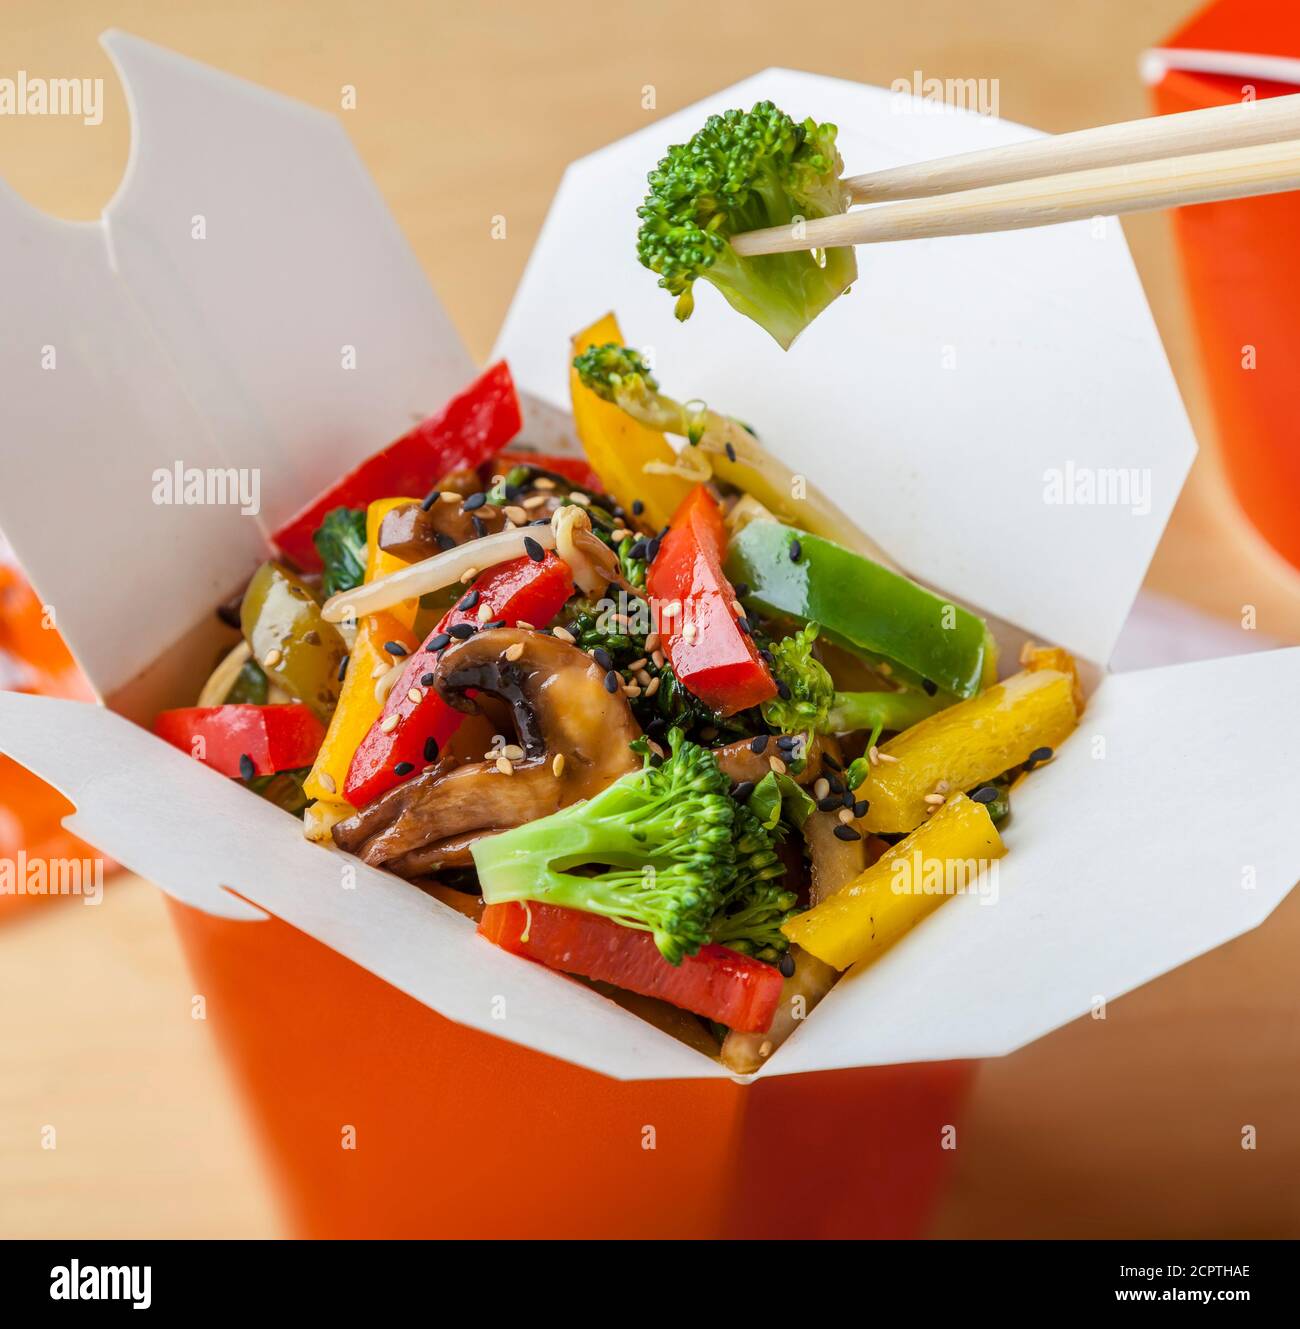 Delicious vegetarian takeaway wok food in a box with chopsticks. Stock Photo